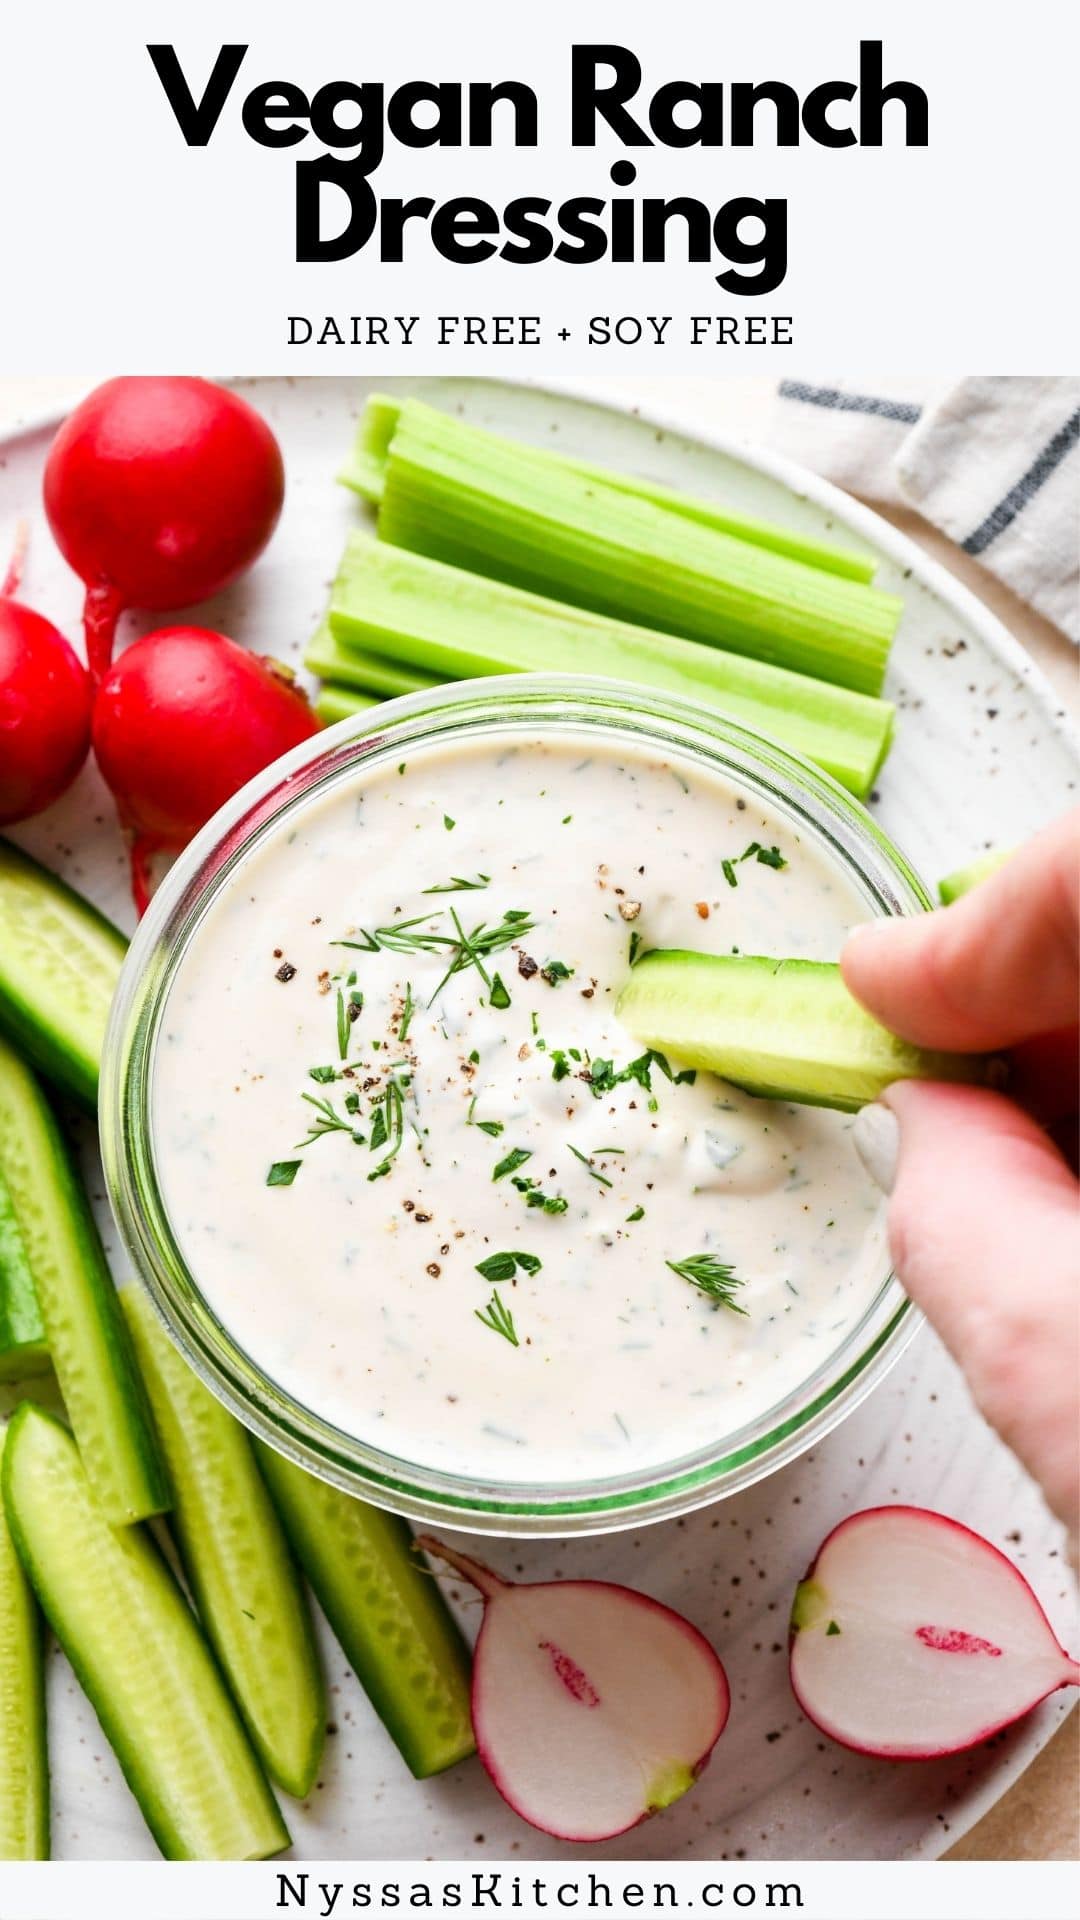 This homemade vegan ranch dressing is thick, creamy, and irresistibly tangy! Made with real plant based ingredients that you probably already have in your pantry like cashews, a simple seasoning blend, and herbs. A perfect dip for fries, veggies, pizza, burgers, or as a delicious salad dressing! Vegan, vegetarian, Whole30, paleo, raw, oil free, dairy free, soy free, and gluten free.